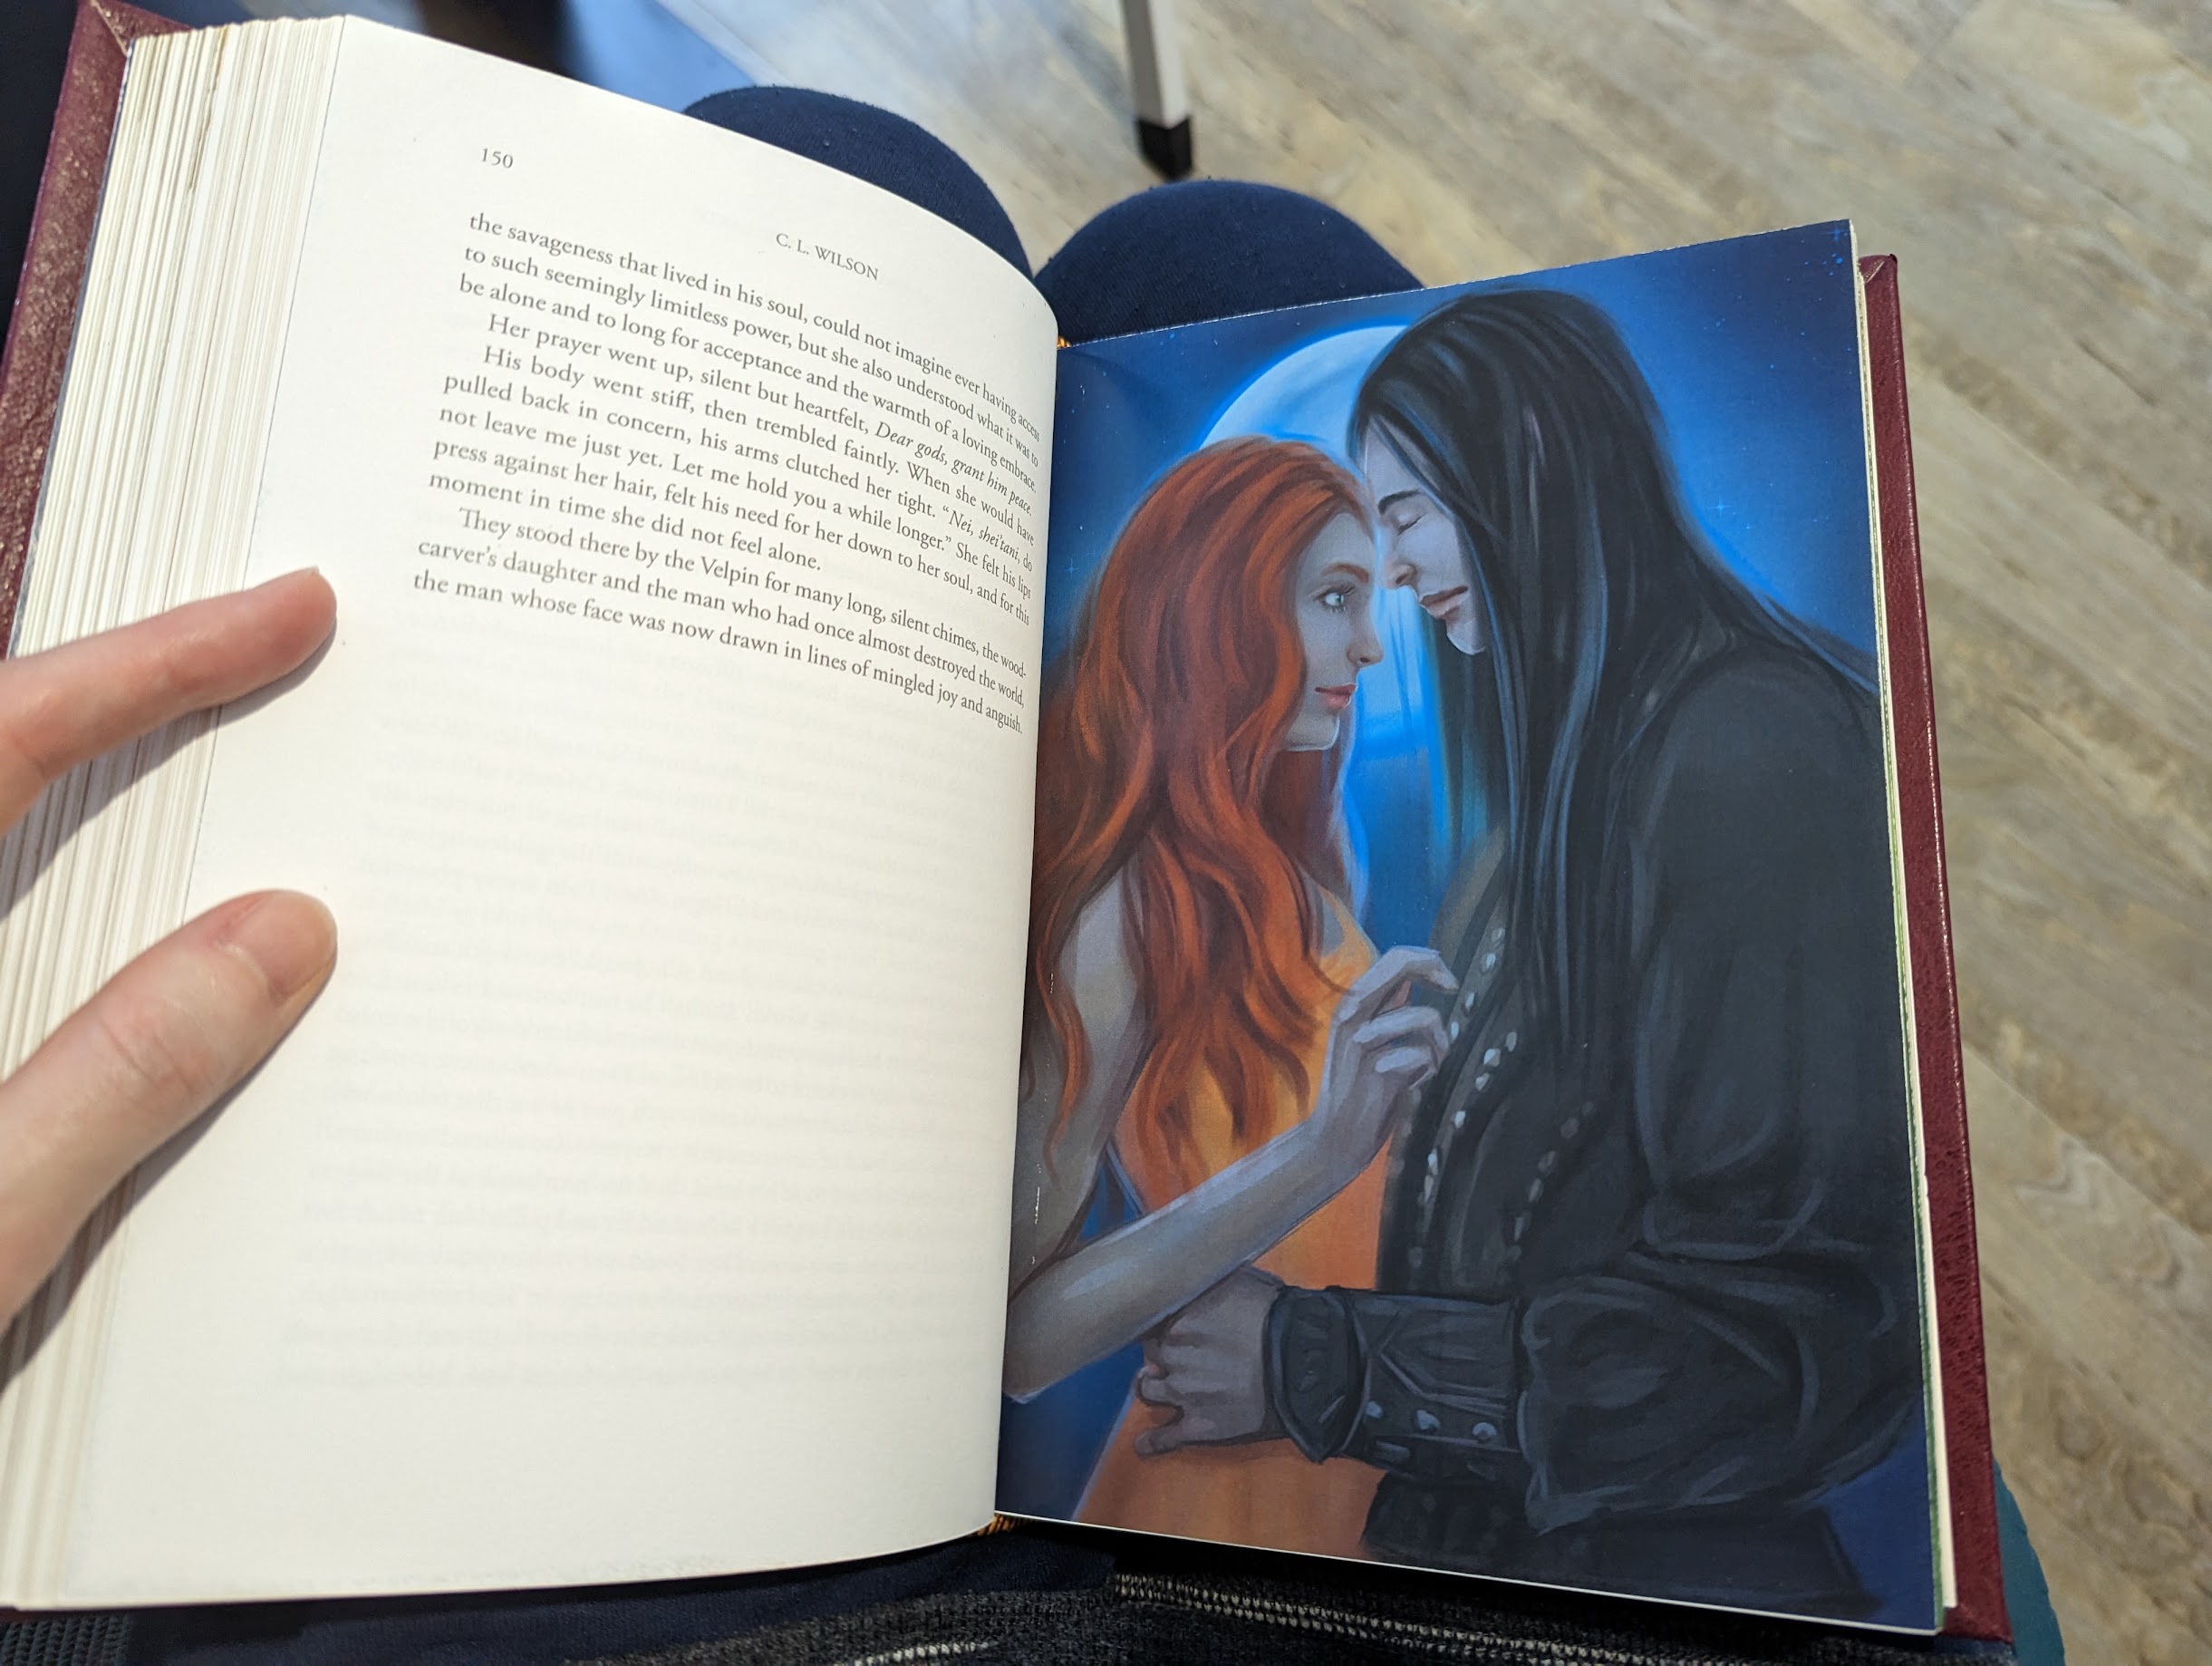 Photo of the inside page of a book. On the left-hand side is text from the book in black and white, and on the right-hand side is a full colour illustration. The illustration features a profile shot of a man and woman with their foreheads touching. The man's eyes are closed, and the woman is looking up at him a bit, shyly. In the background behind them is a full moon.